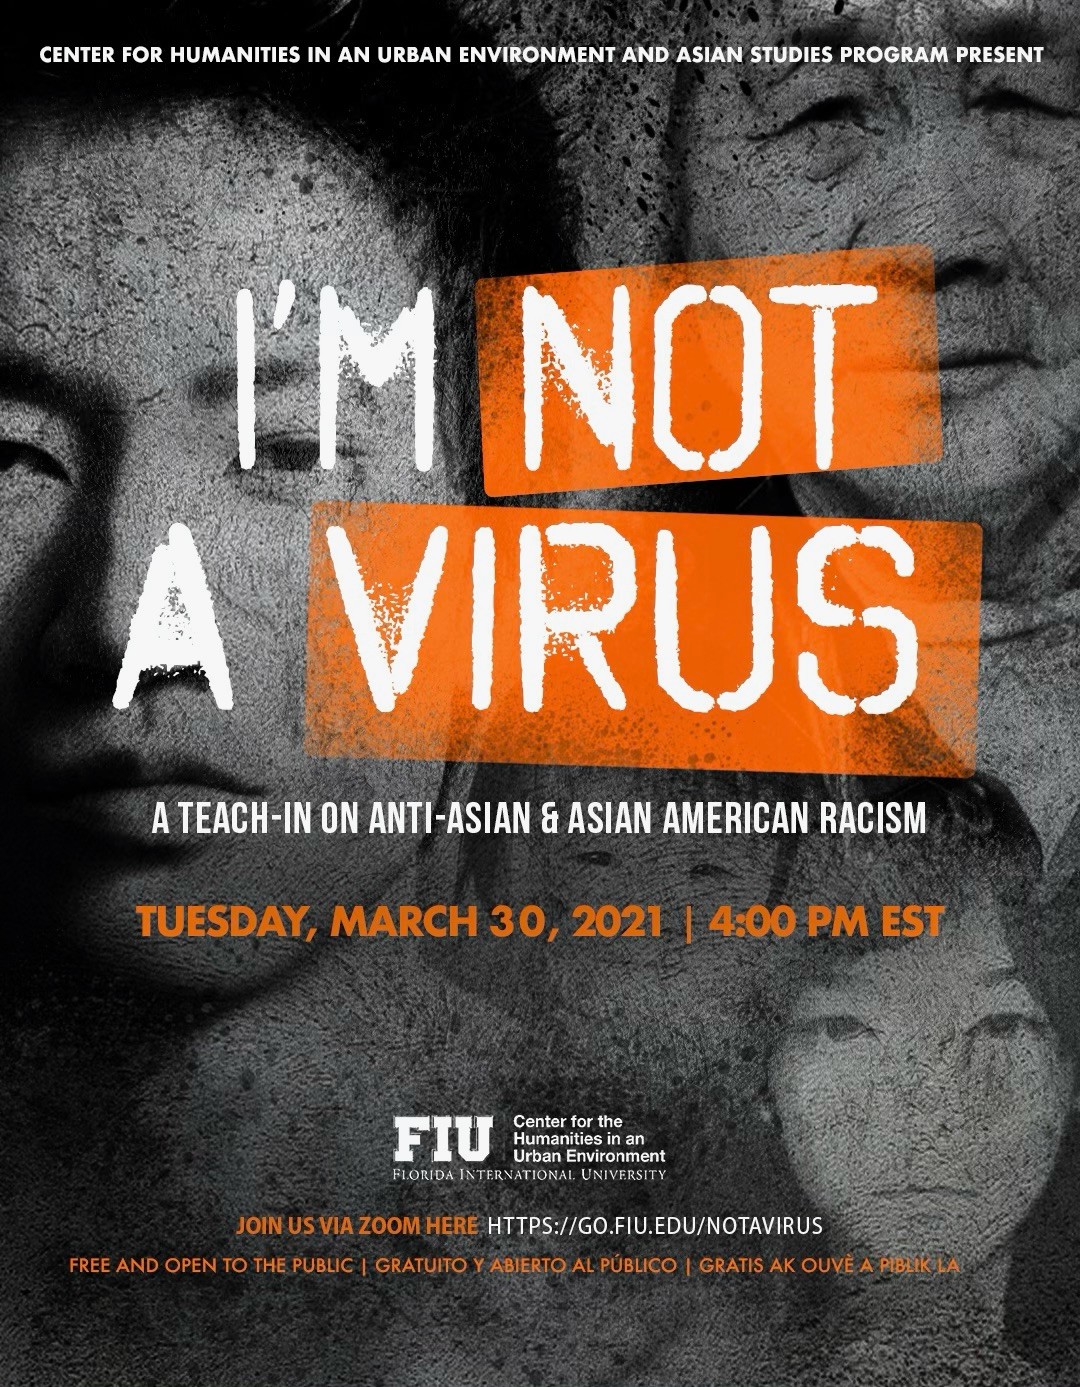 Poster for the Teach-In. The address for the event will be https://go.fiu.edu/notavirus